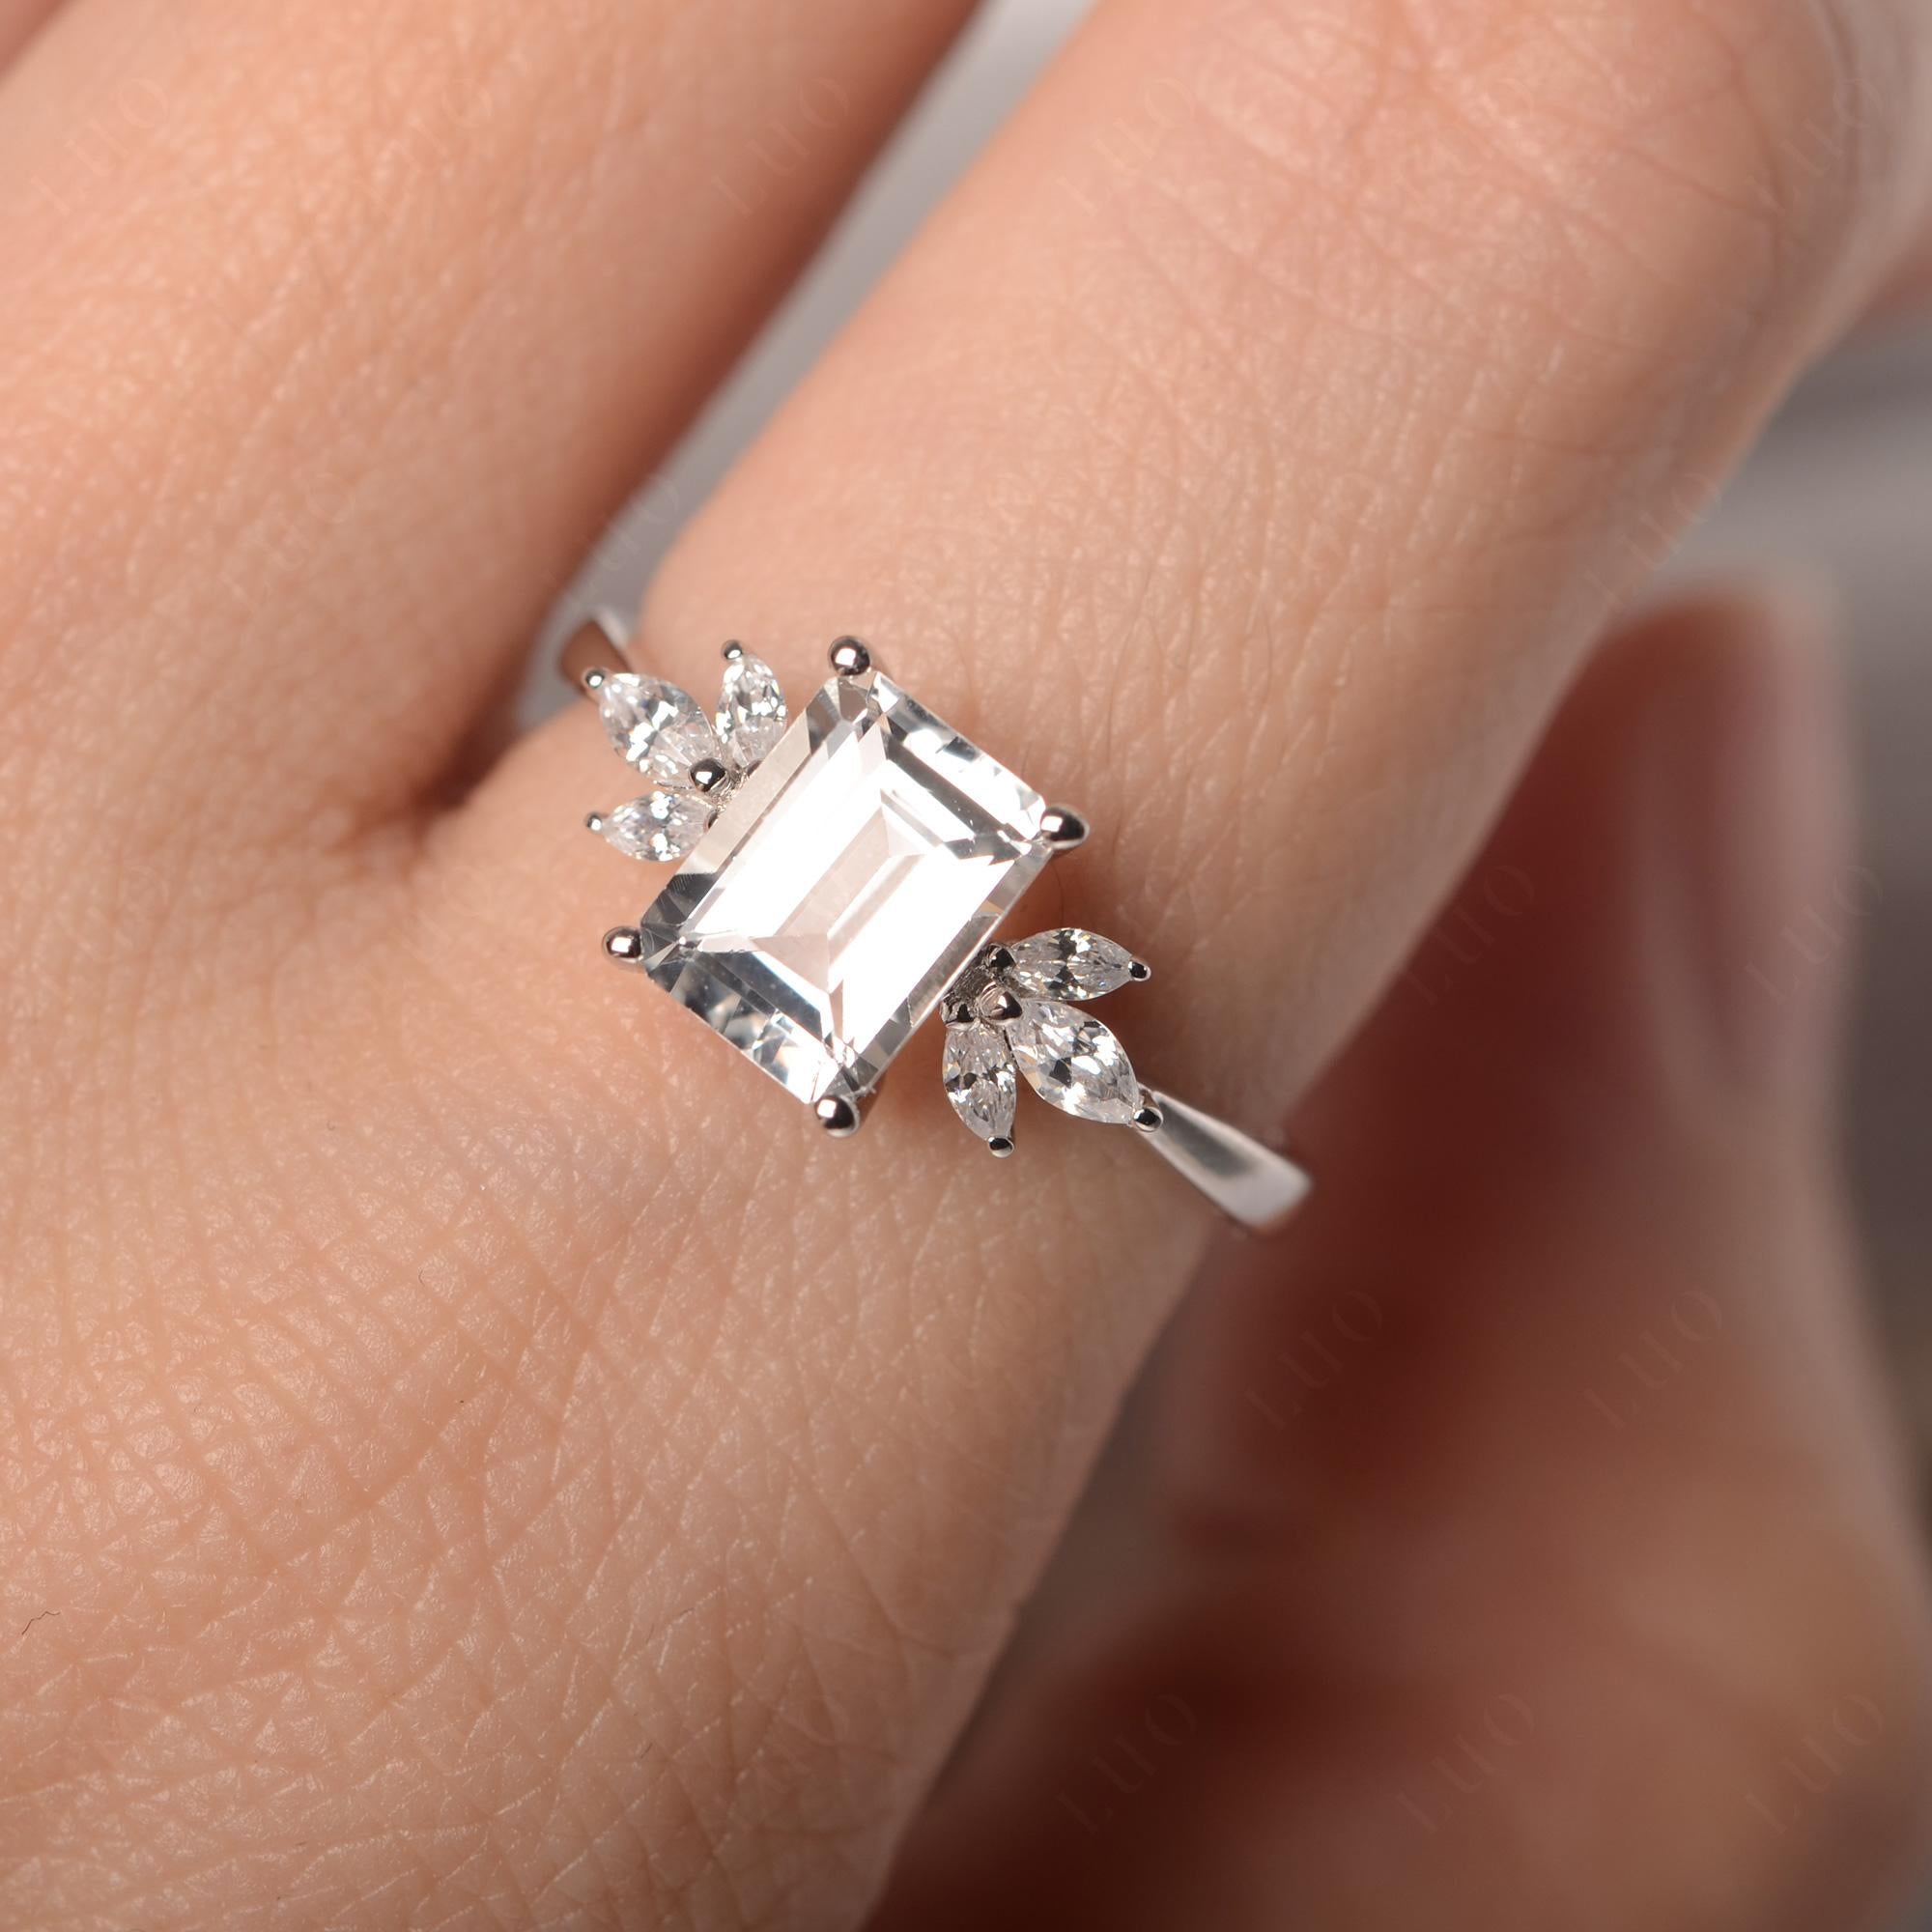 White Topaz Ring Emerald Cut Wedding Ring - LUO Jewelry